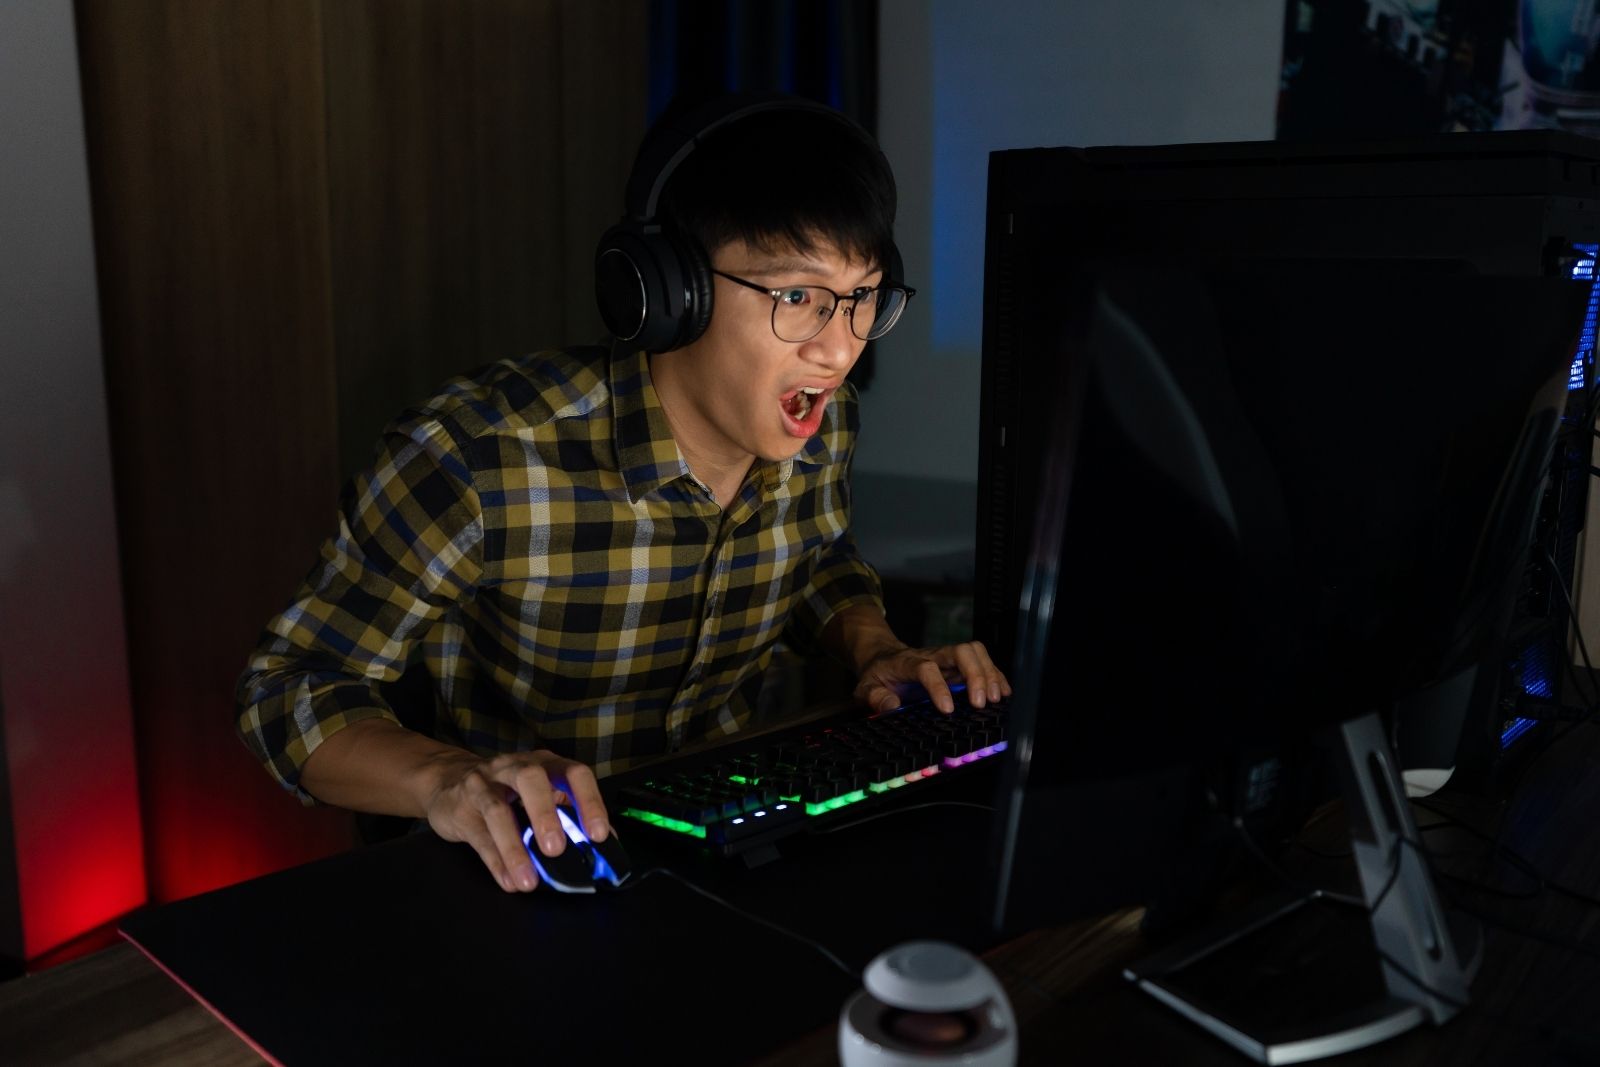 Asian teenager playing PC game in darkened room